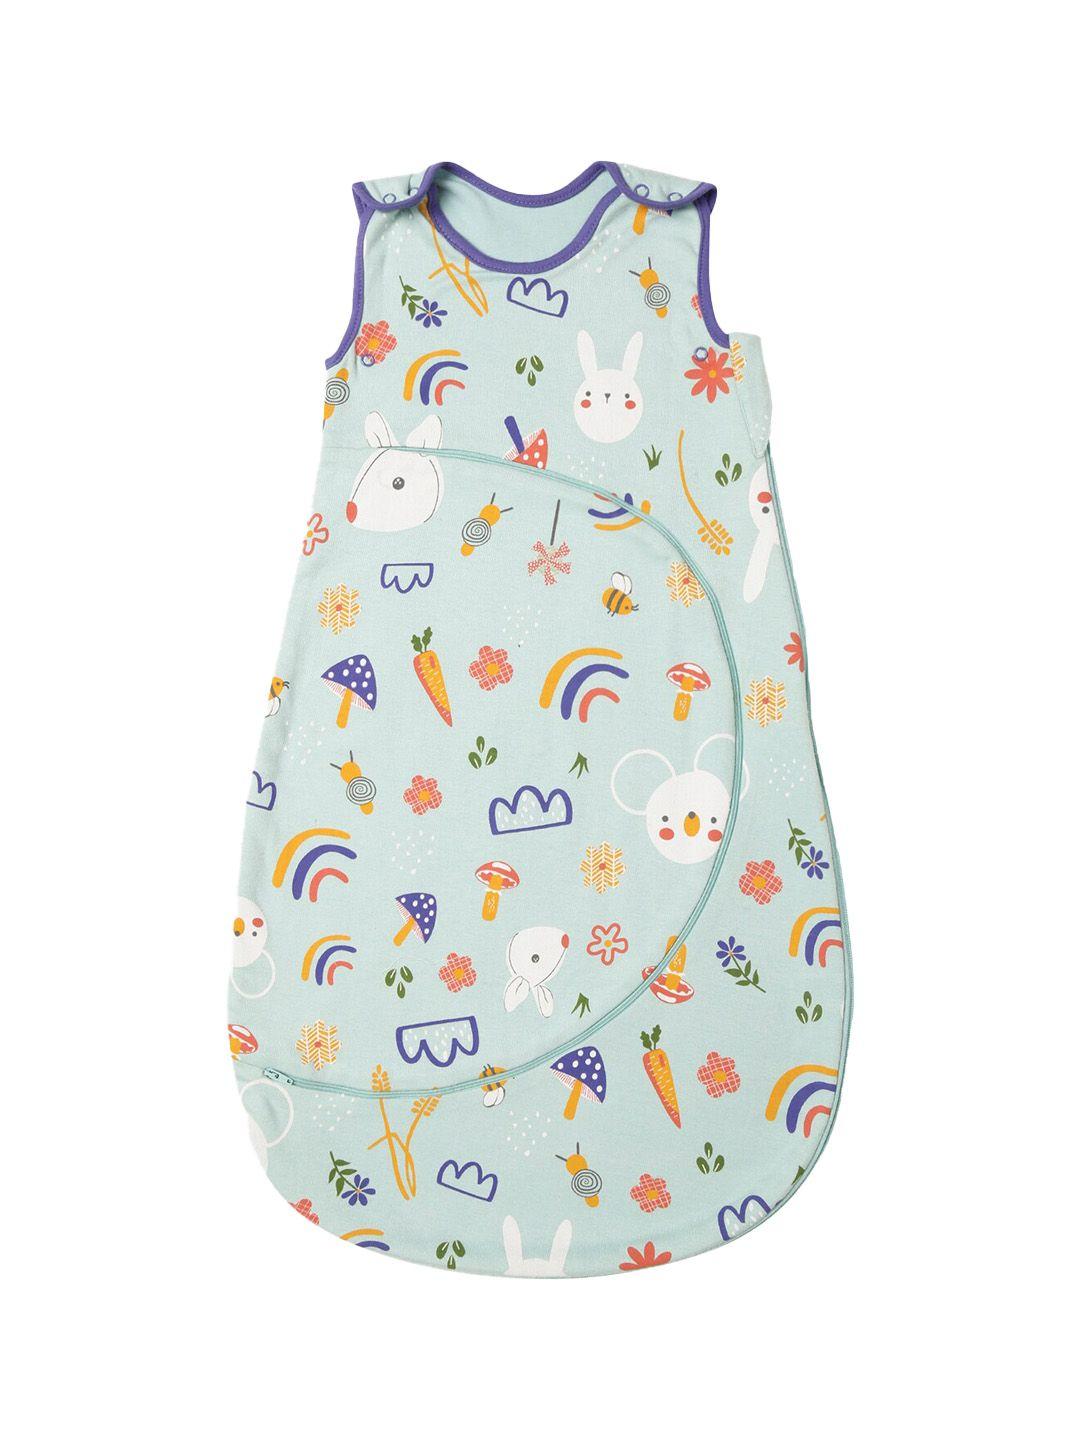 miarcus infant kids blue & white printed knitted sleeping bag